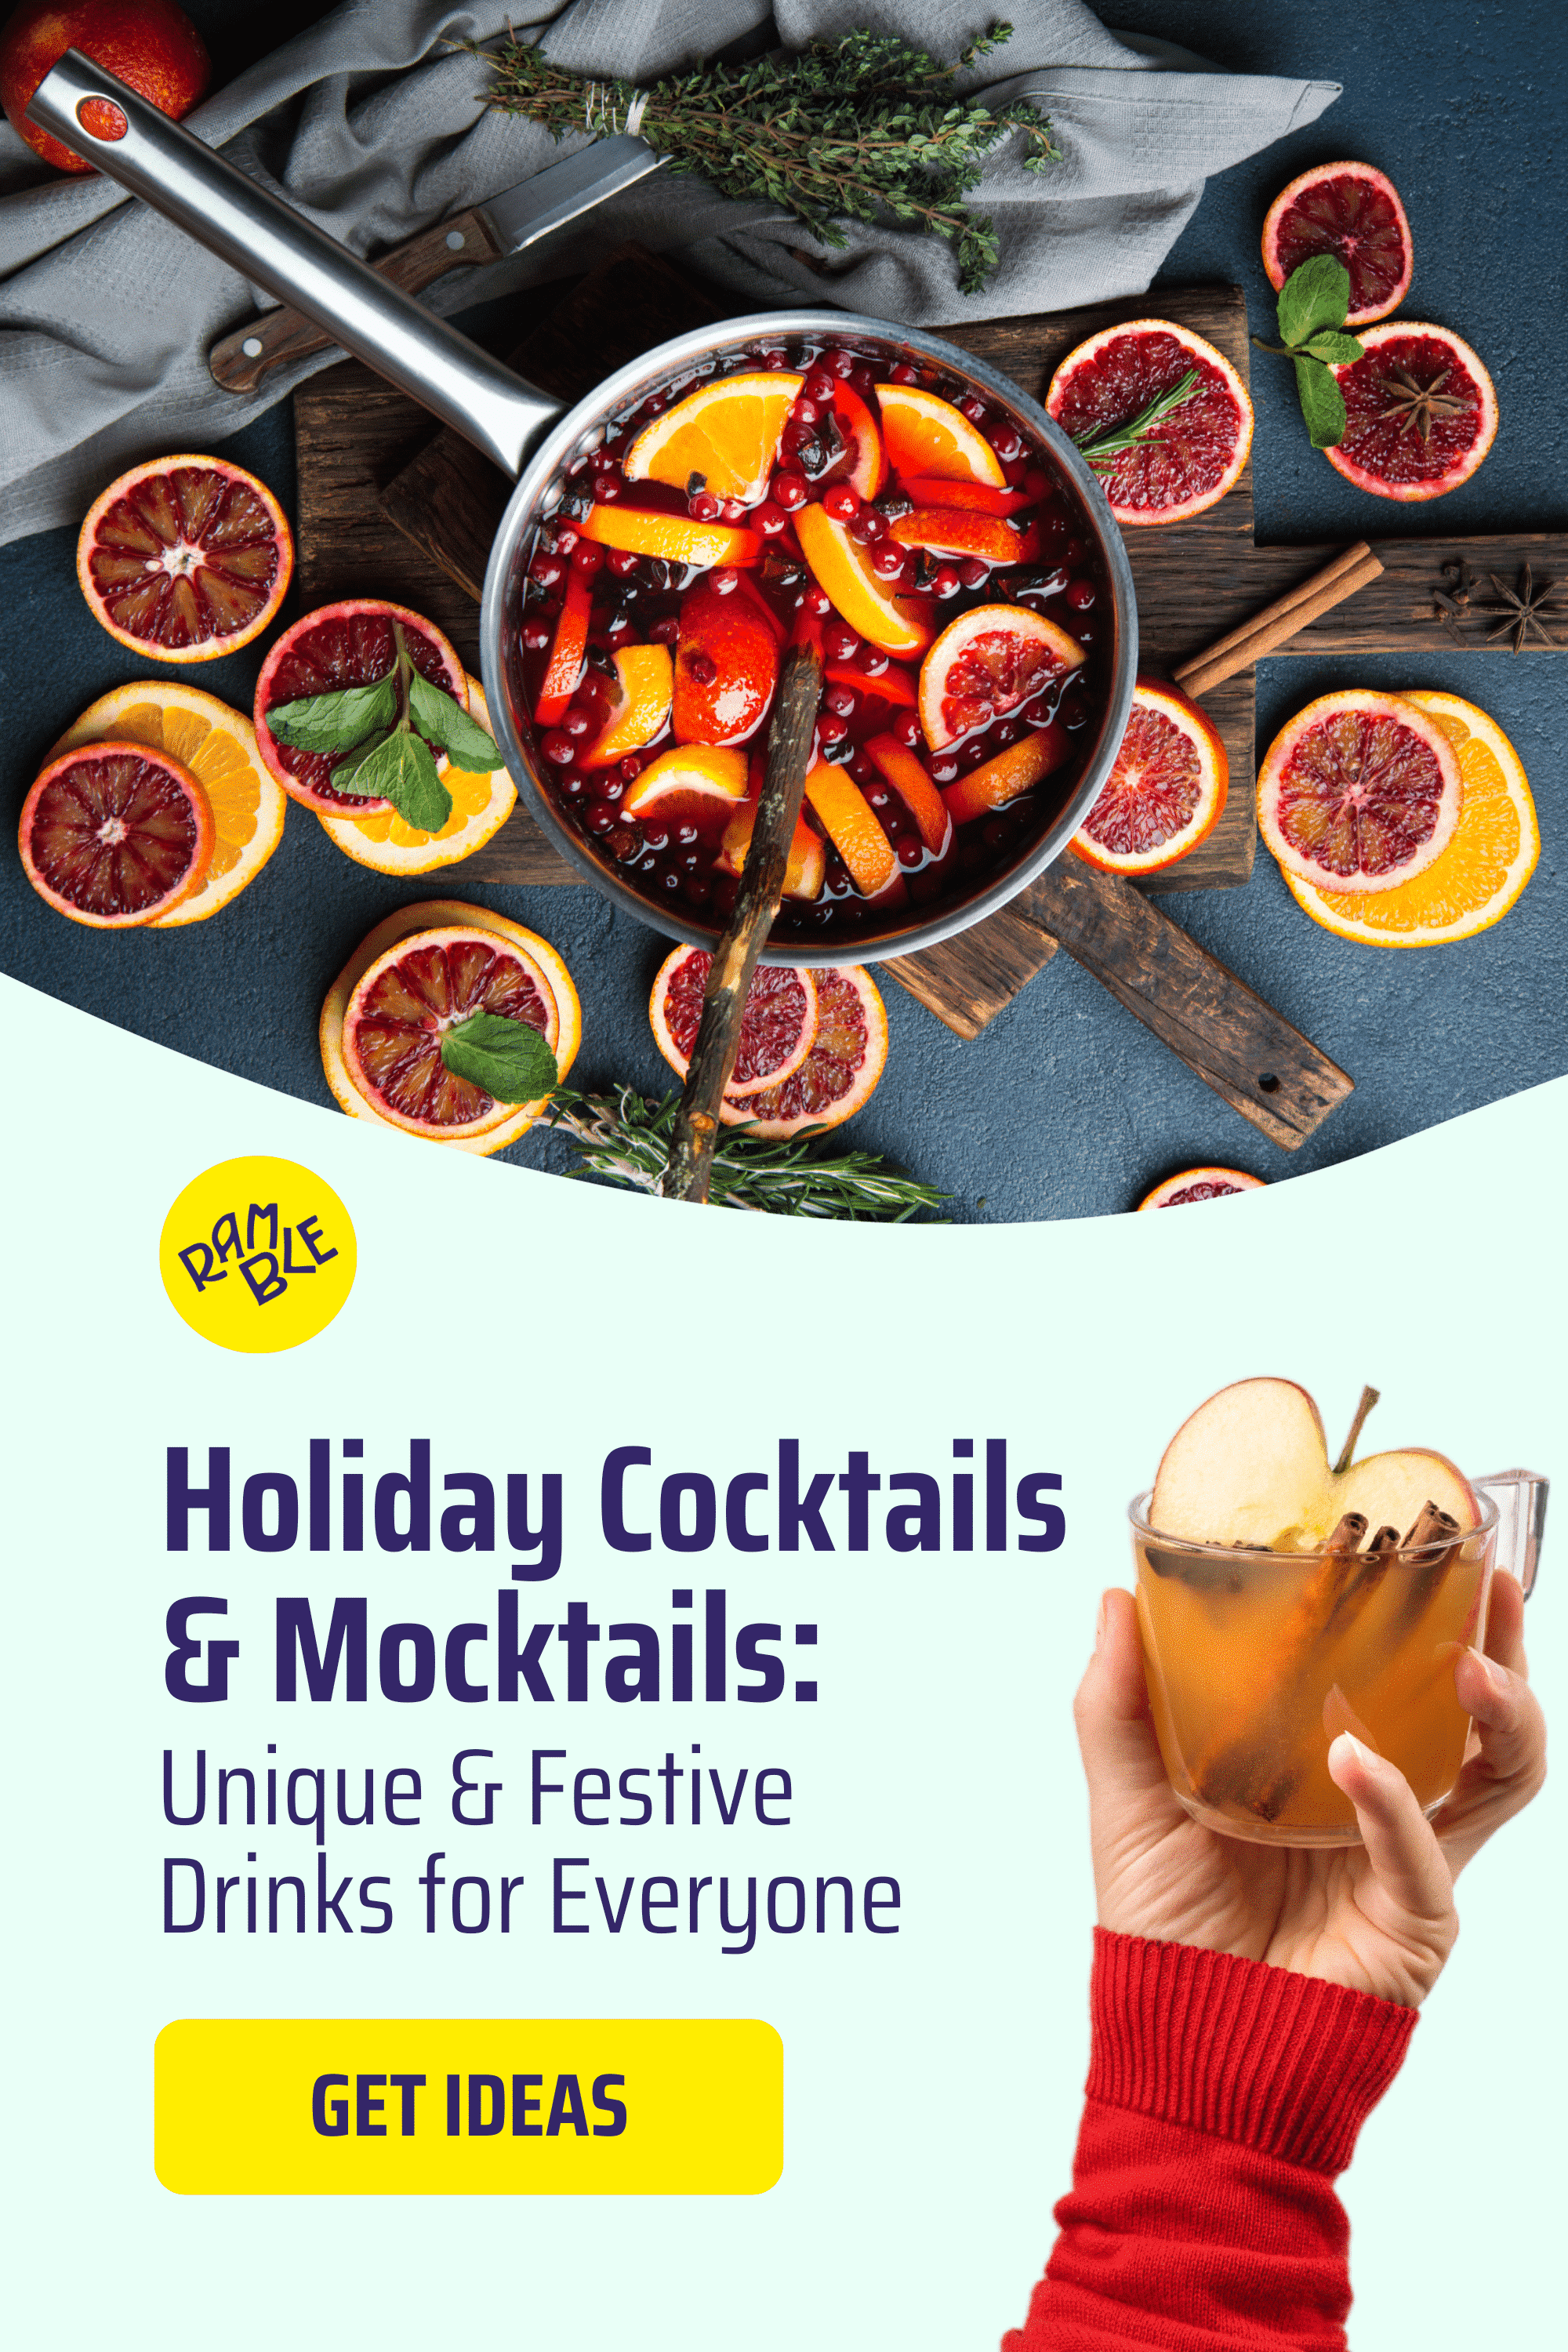 Pinterest—Ramble Gifts: Holiday Cocktails & Mocktails